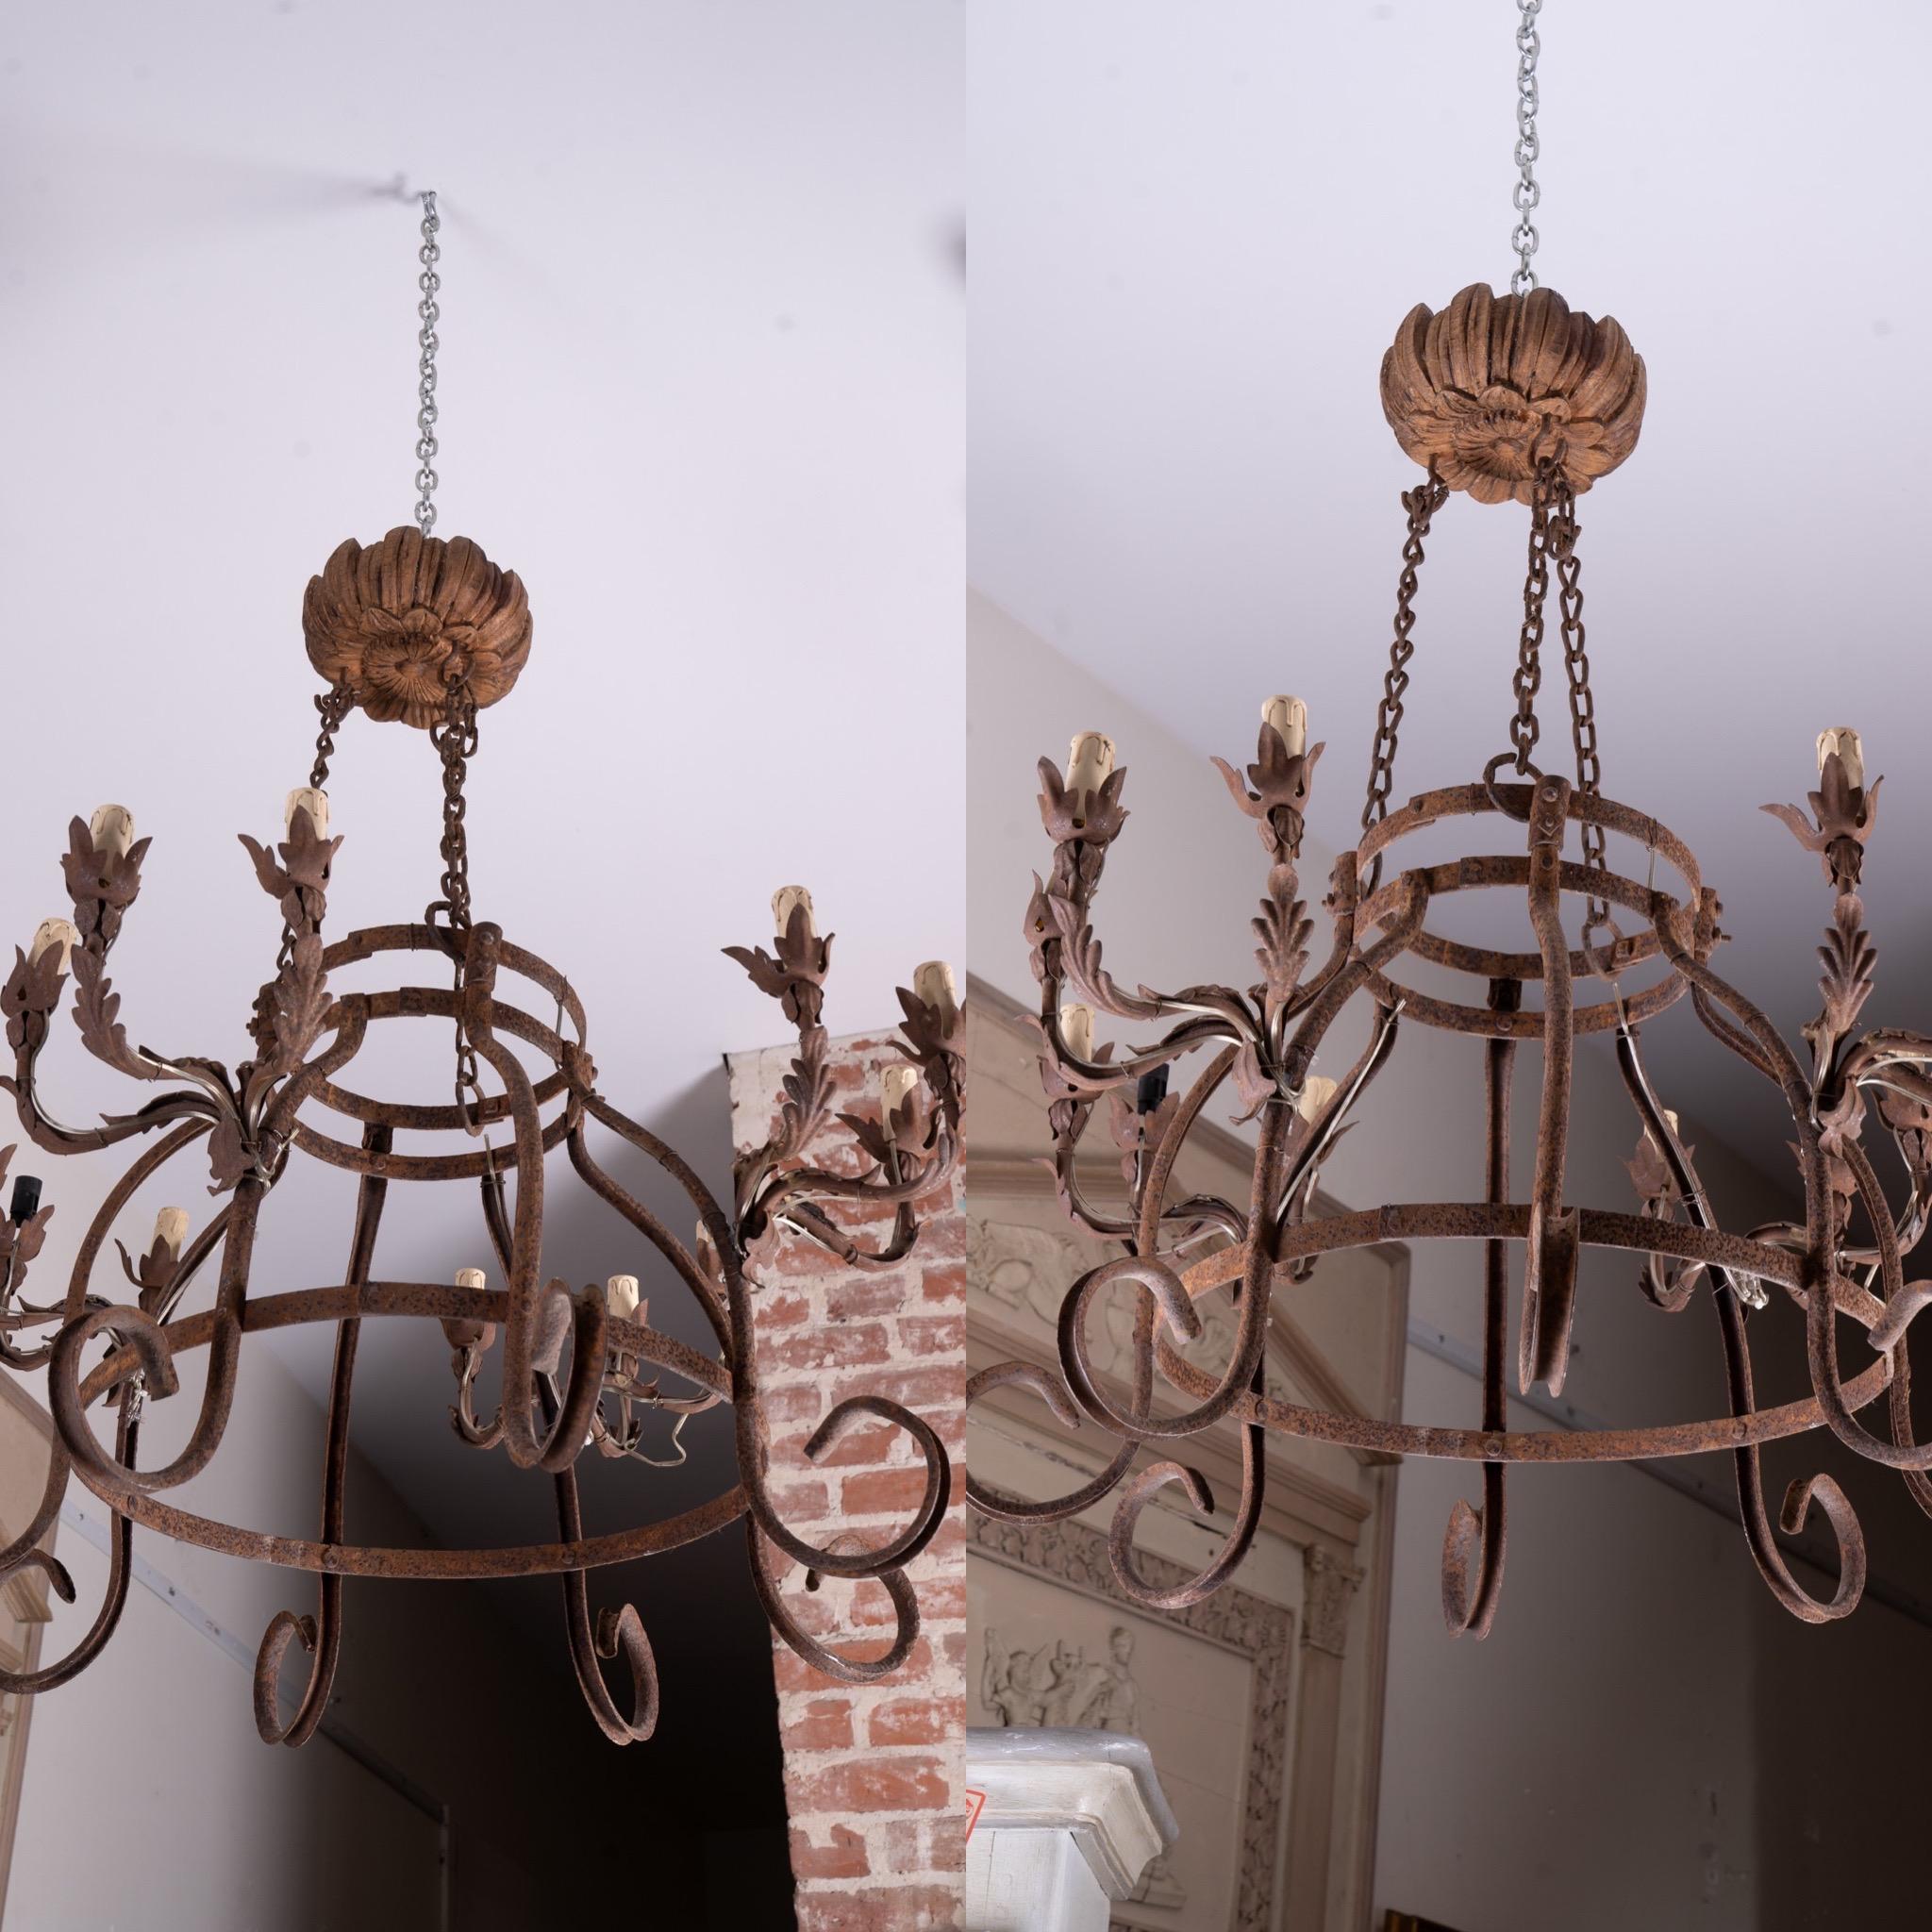 This pair of hand wrought highly decorative iron chandeliers would be perfect over a kitchen island or any covered outdoor space. Many customers have used iron chandeliers as pot holders in the kitchen or candle lighting in the garden. Having a pair